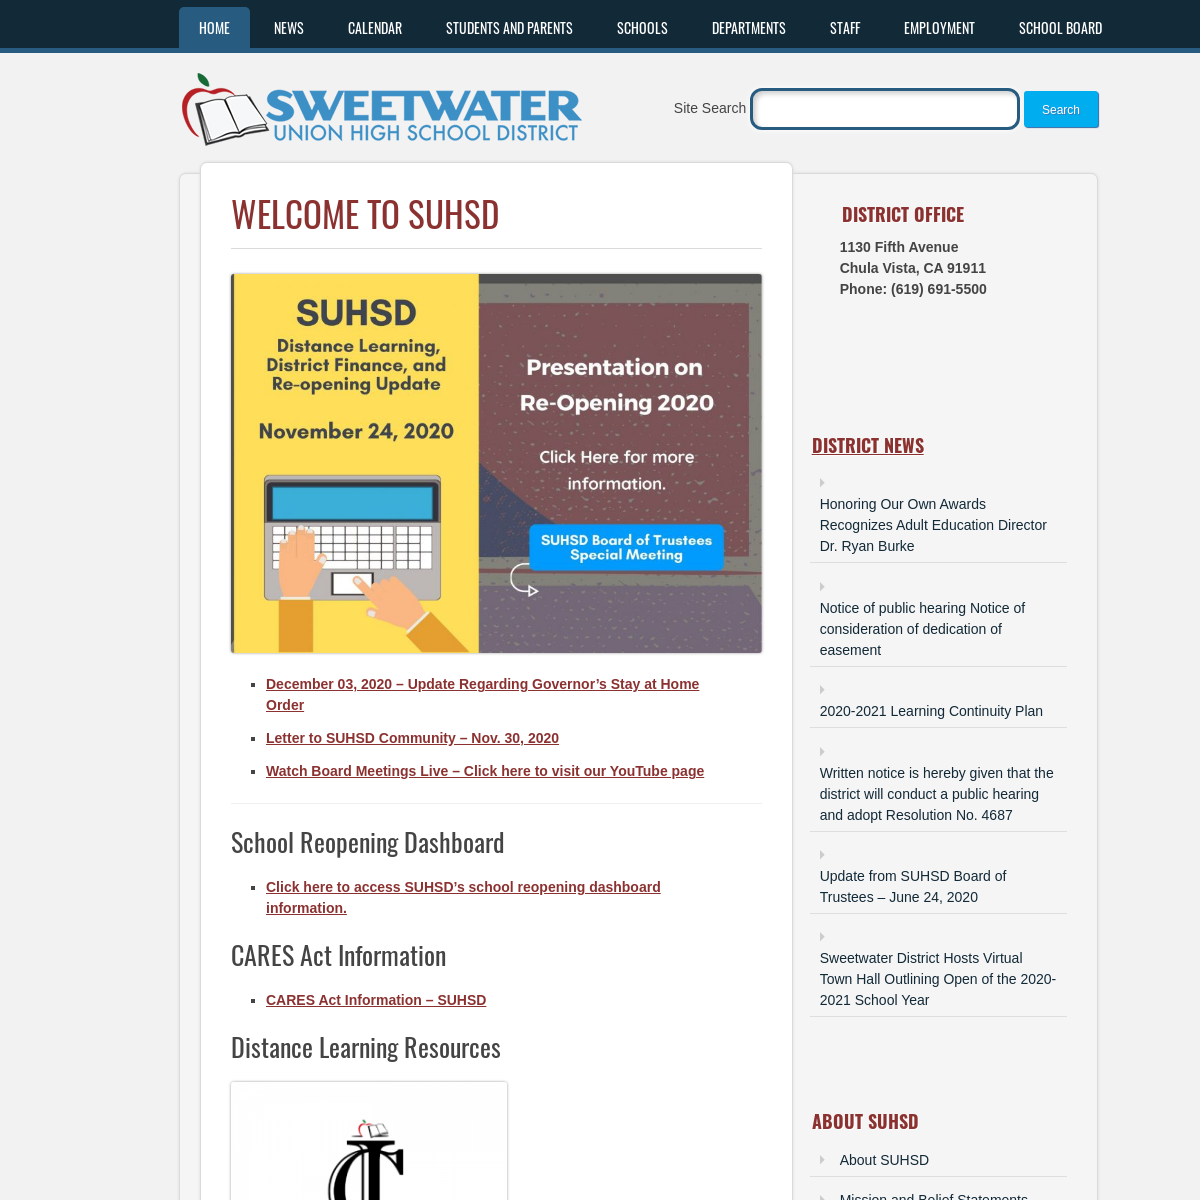 A complete backup of sweetwaterschools.org